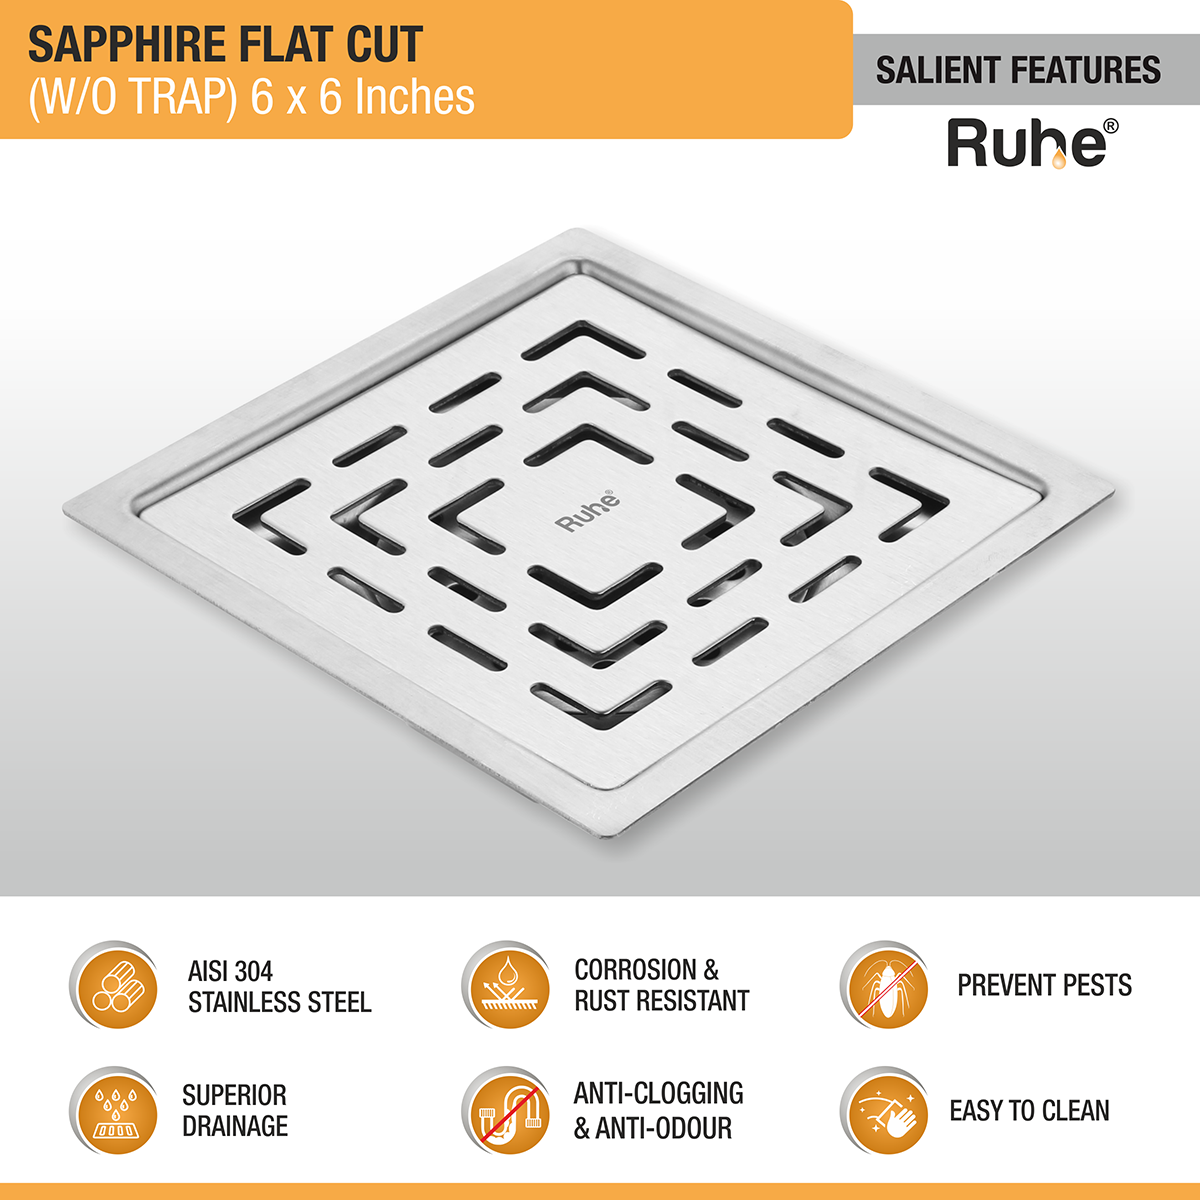 Sapphire Square Flat Cut 304-Grade Floor Drain (6 x 6 Inches) features and benefits